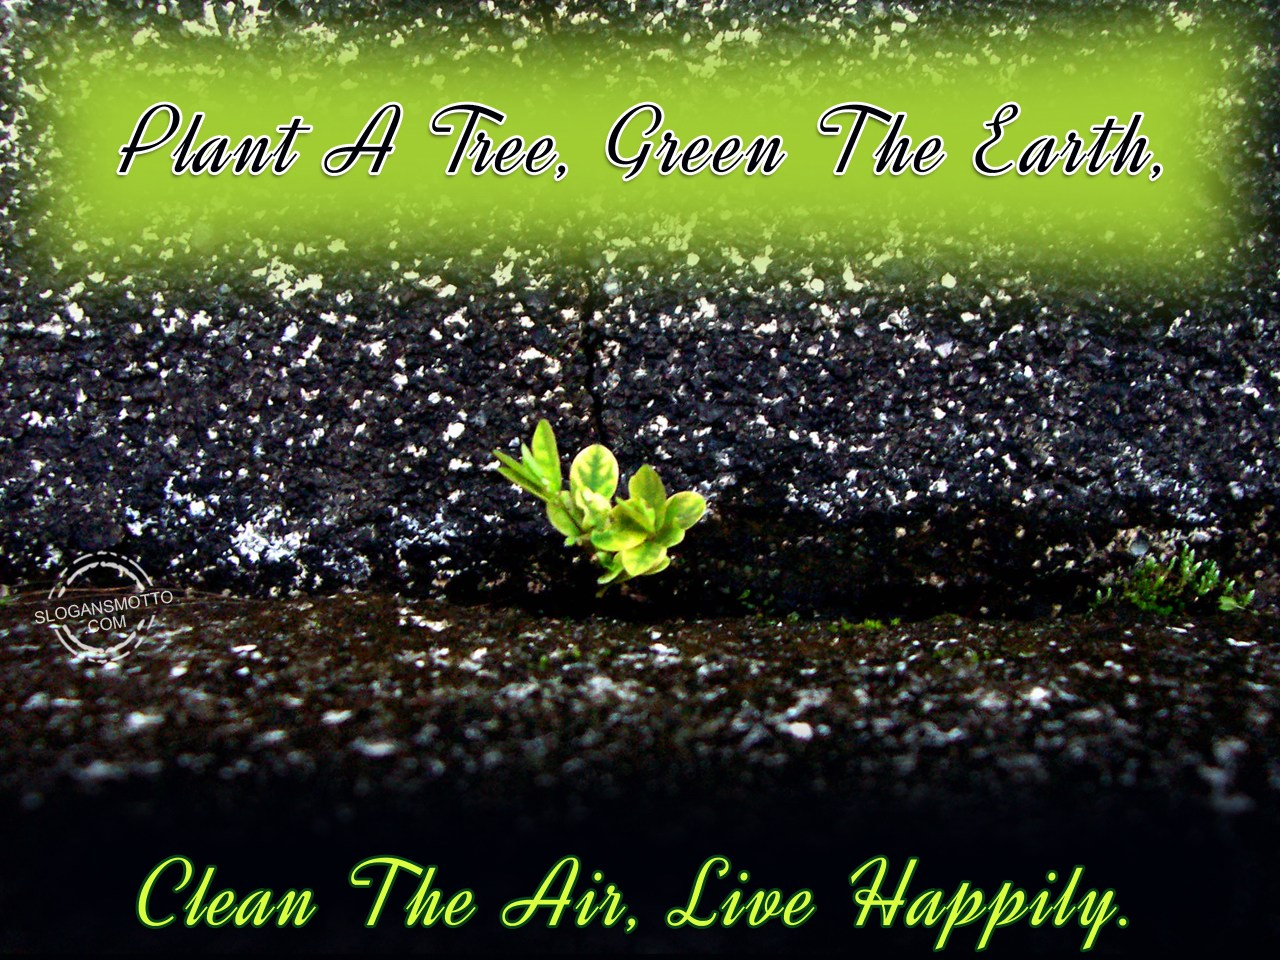 Plant a tree green the earth clean the air live happily